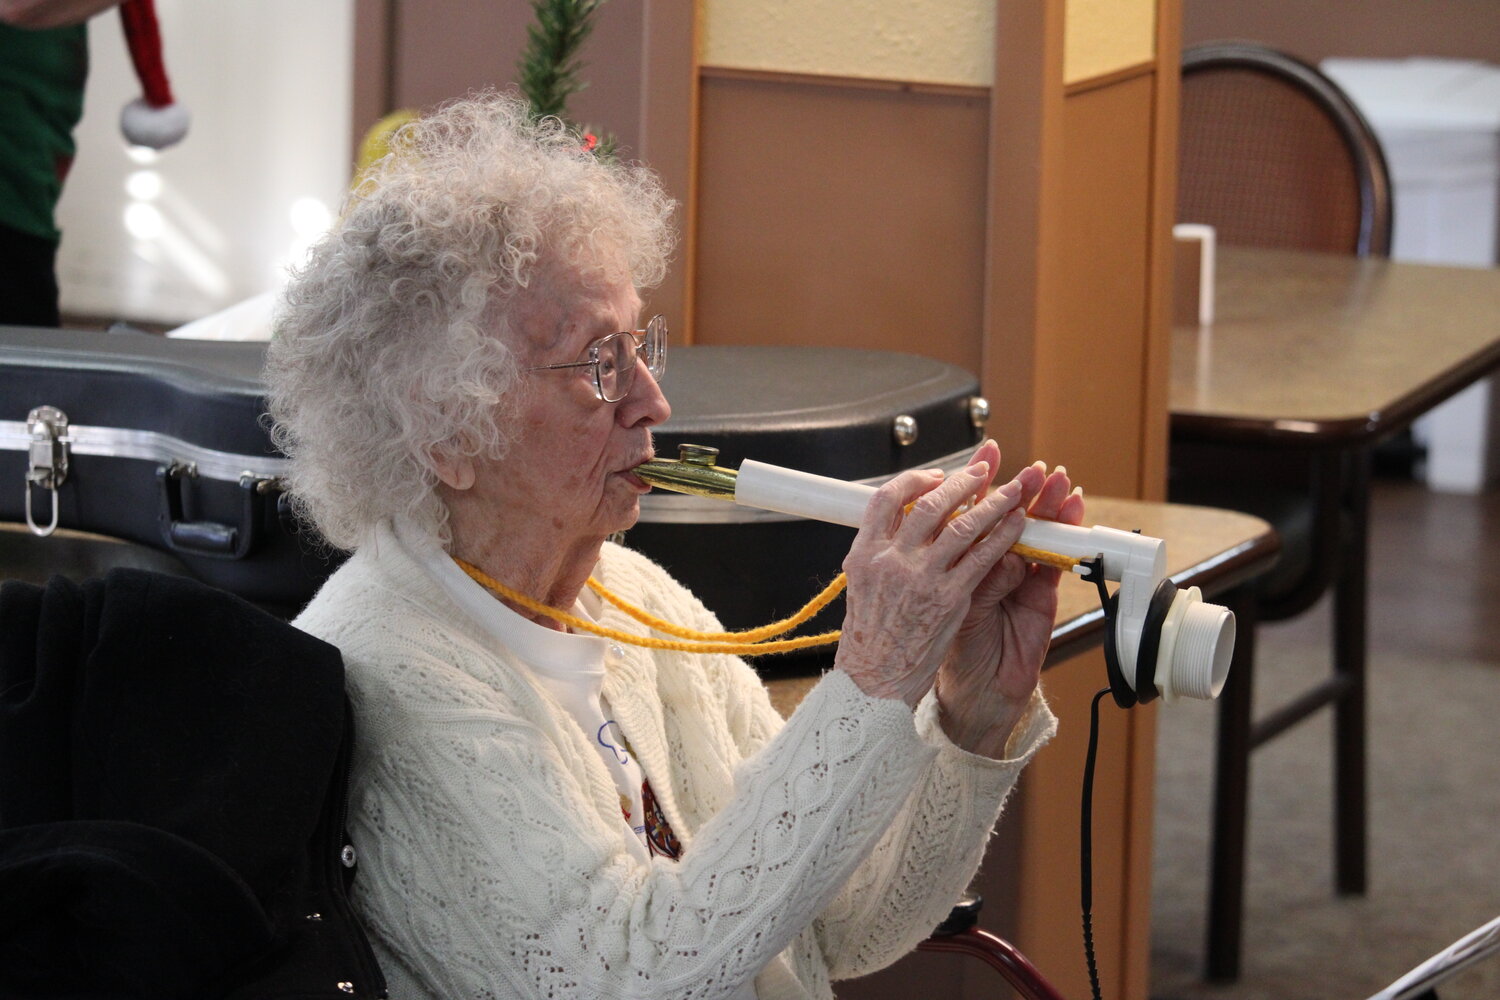 Glorida Bell, of Wright City, plays her kitchen instrument as she leads residents of Warrenton Manor in “Jingle Bells” on Dec. 18.